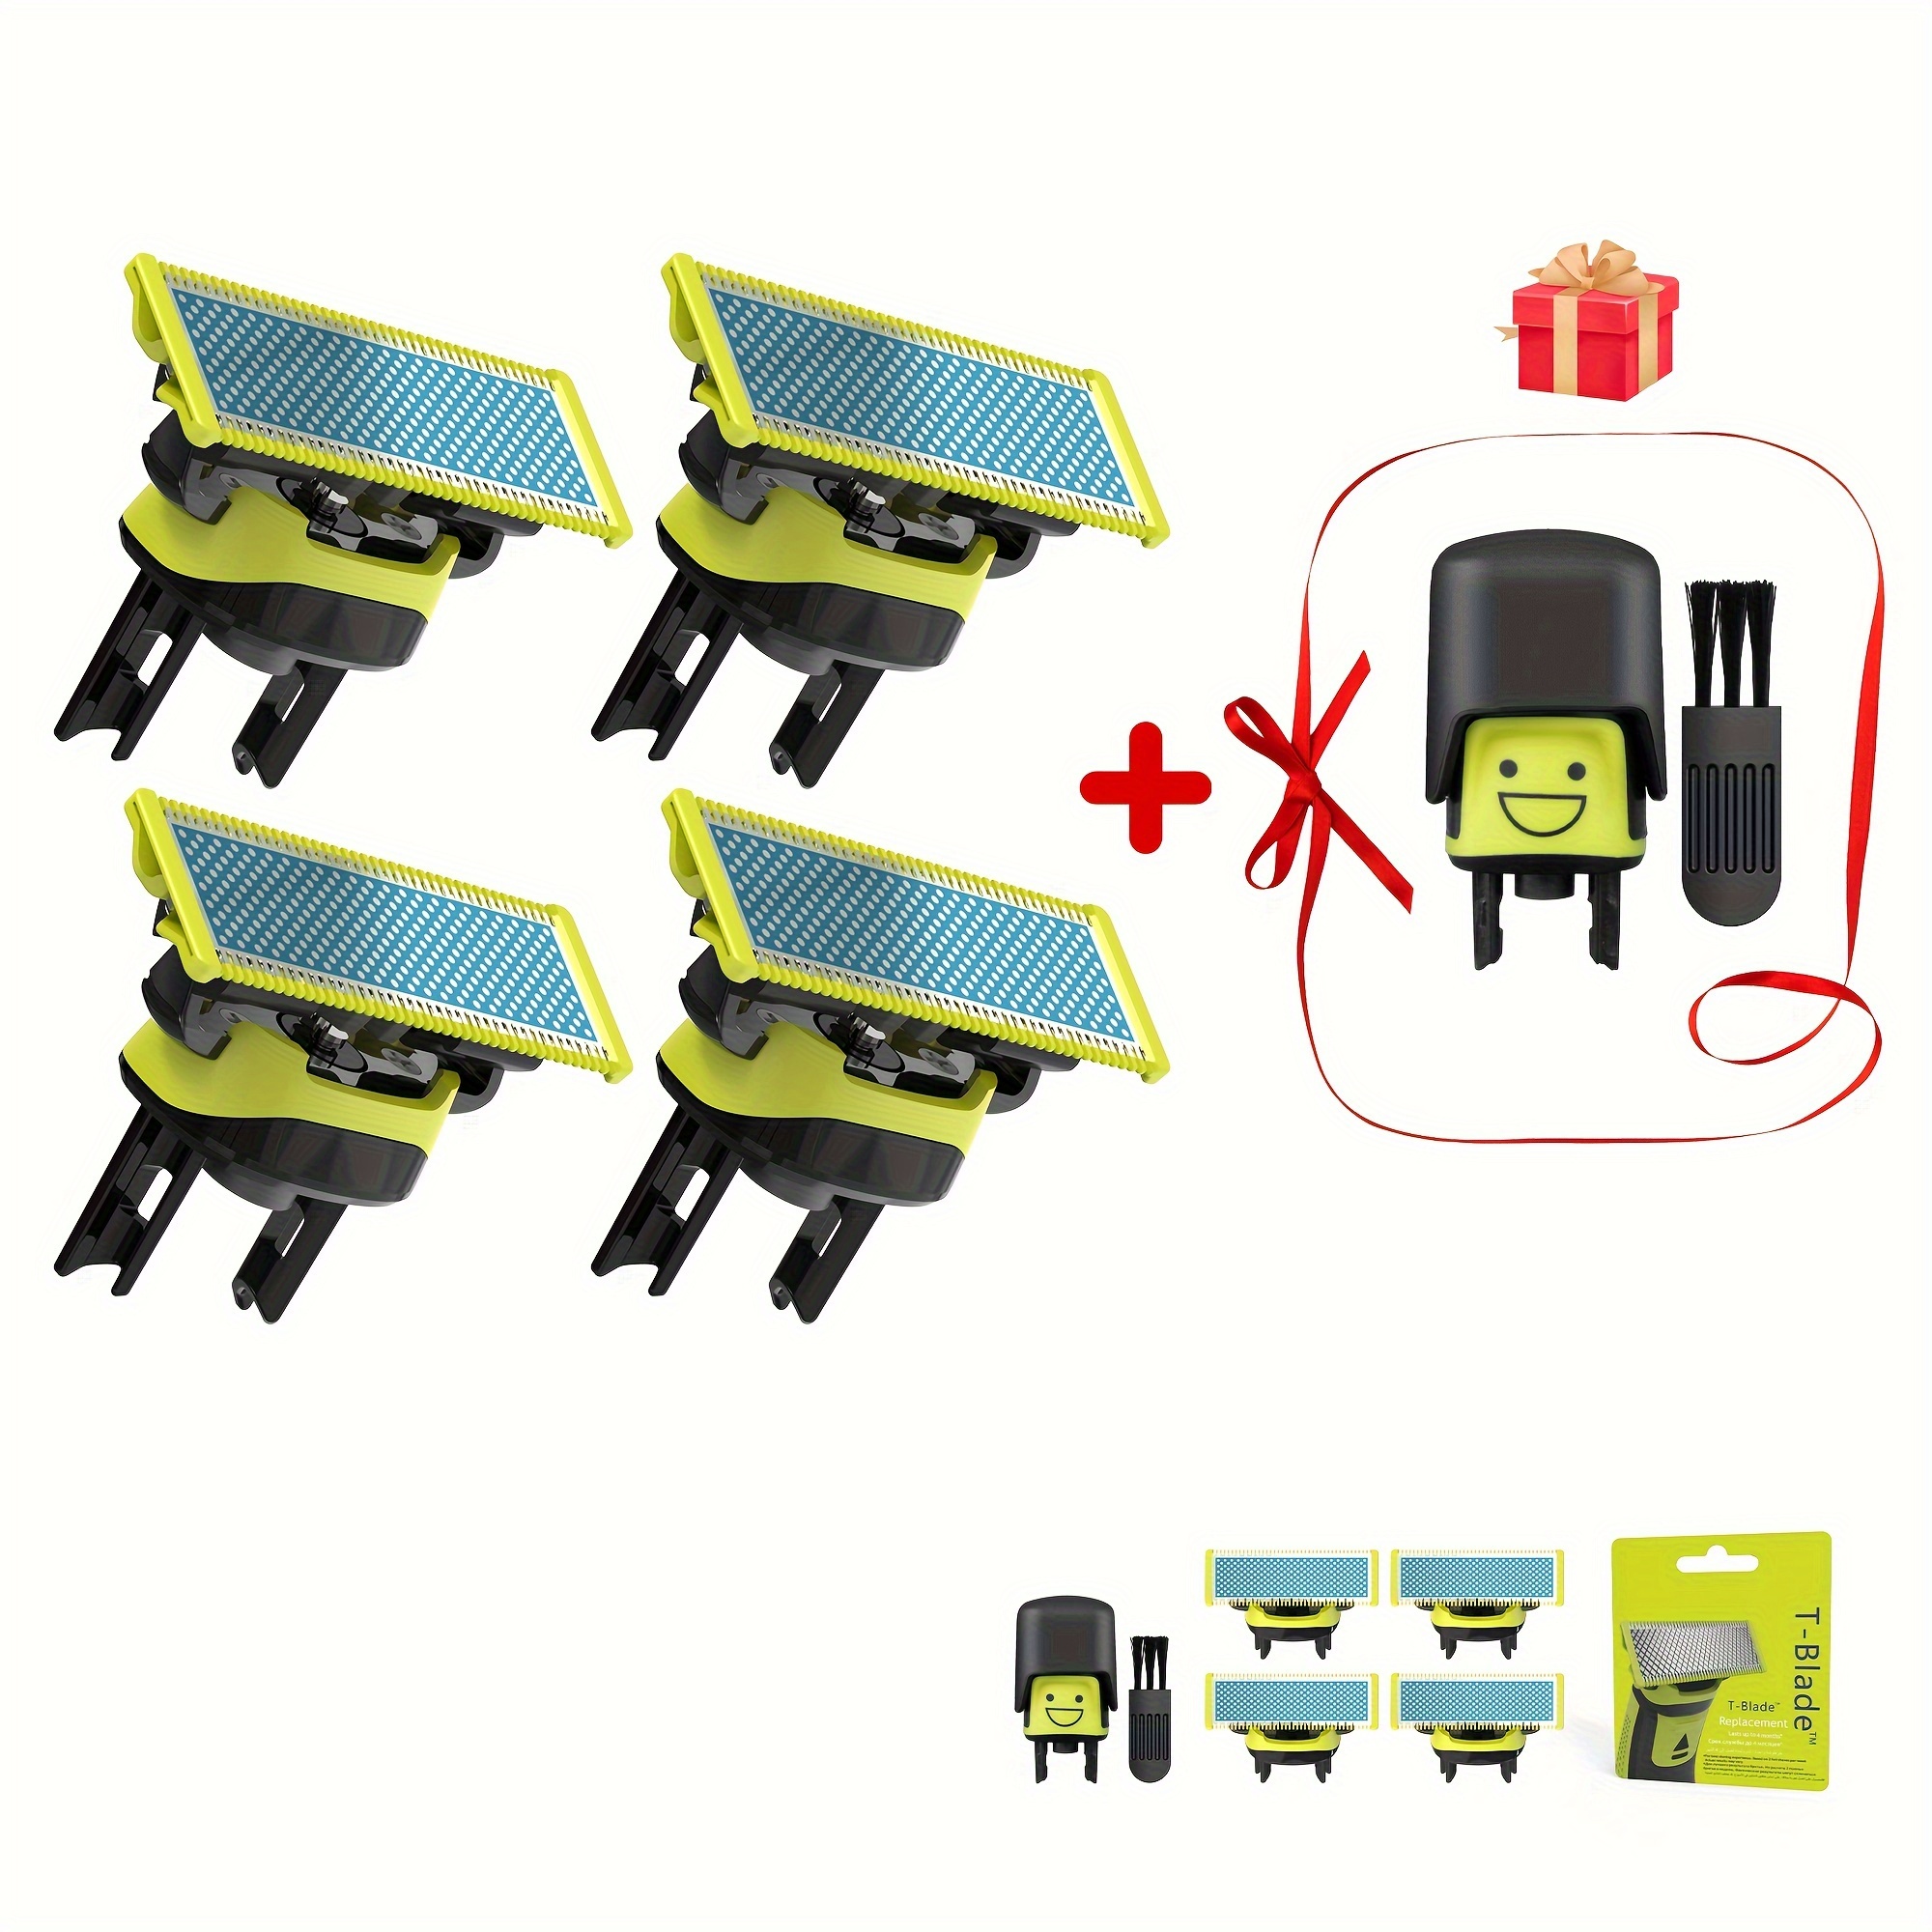 

6-piece Oneblade Accessory Kit: 4 Anti-friction Blades, Smile Nose Hair Head & Cleaning Brush - Compatible With Qp2520, Qp2530, Qp2620, Qp2630, Qp6510, Qp6520 Models